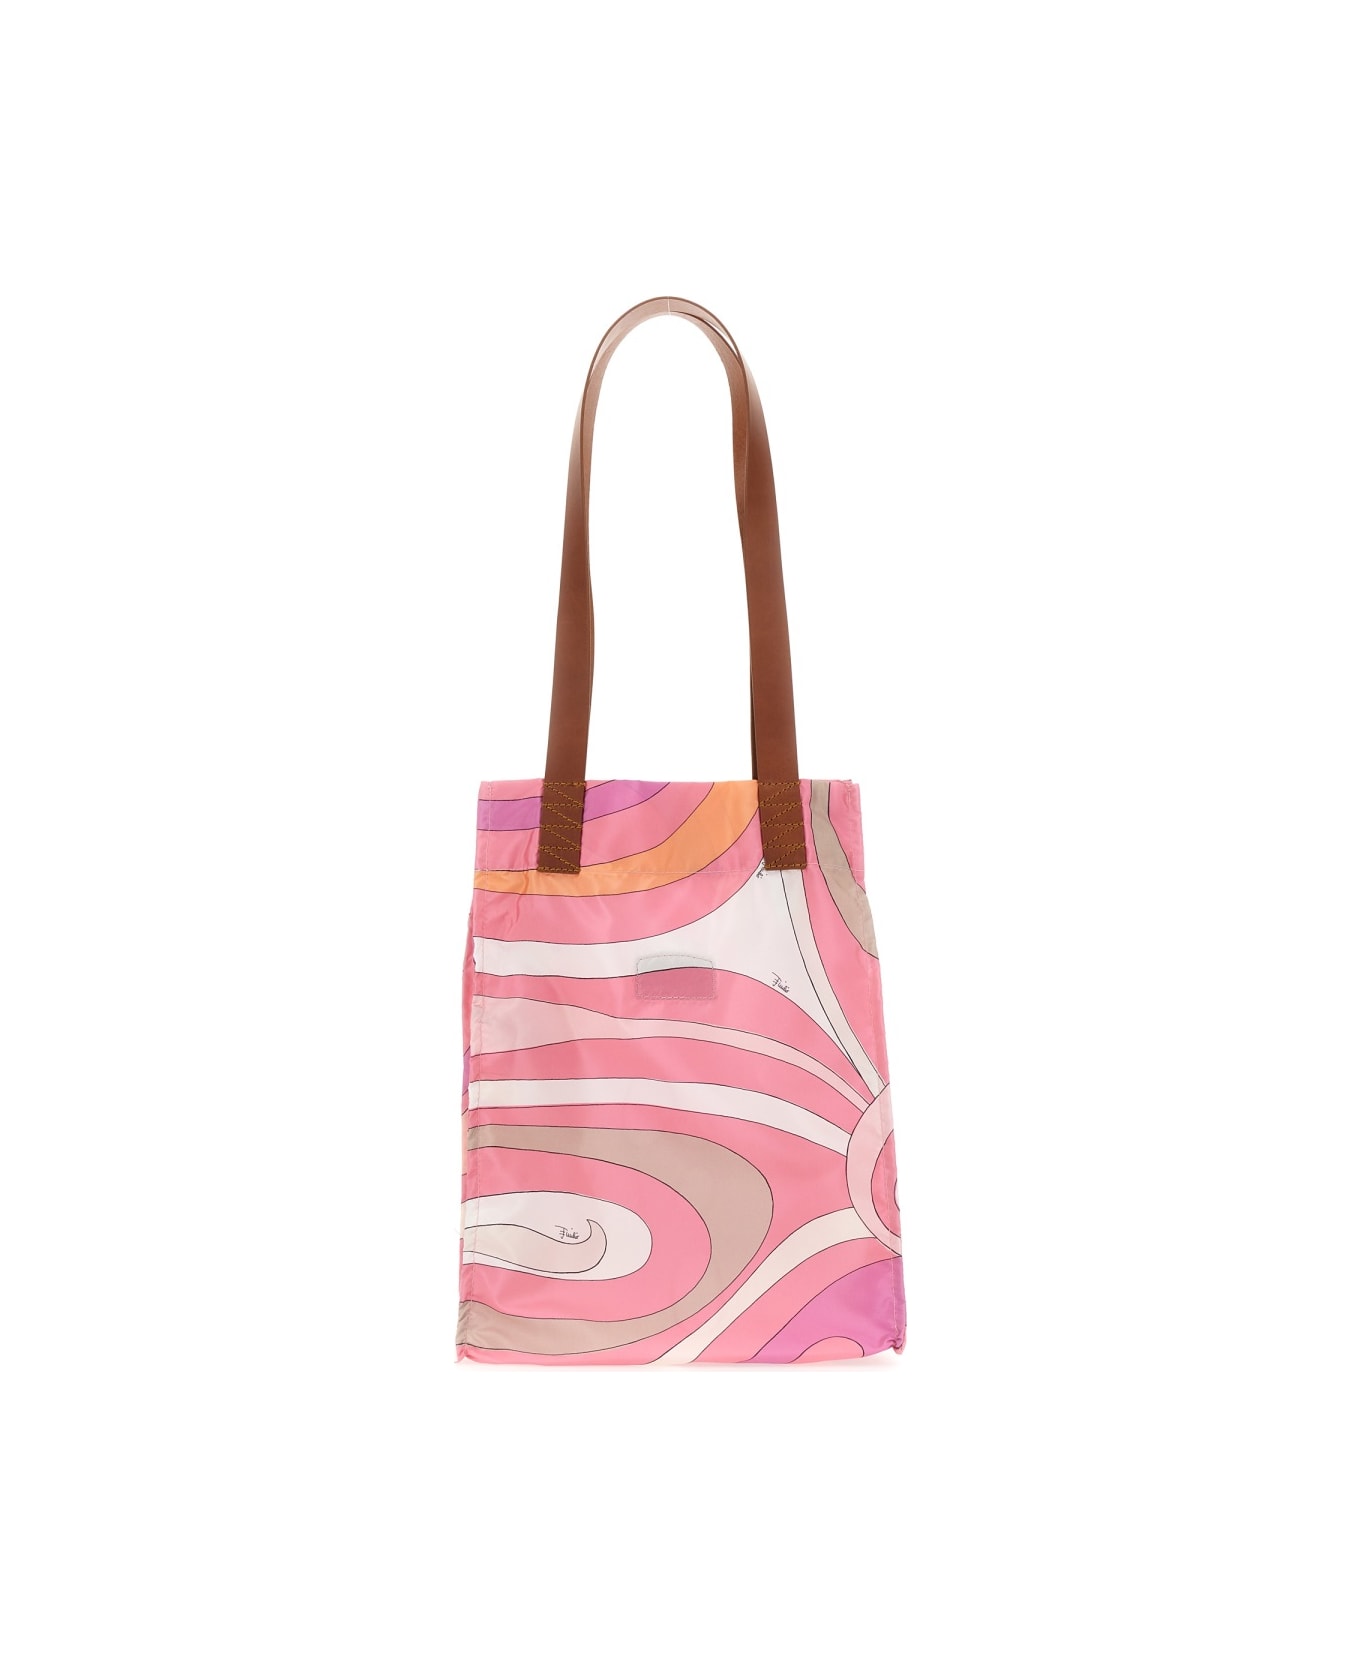 Pucci Patterned Tote Bag - ROSA